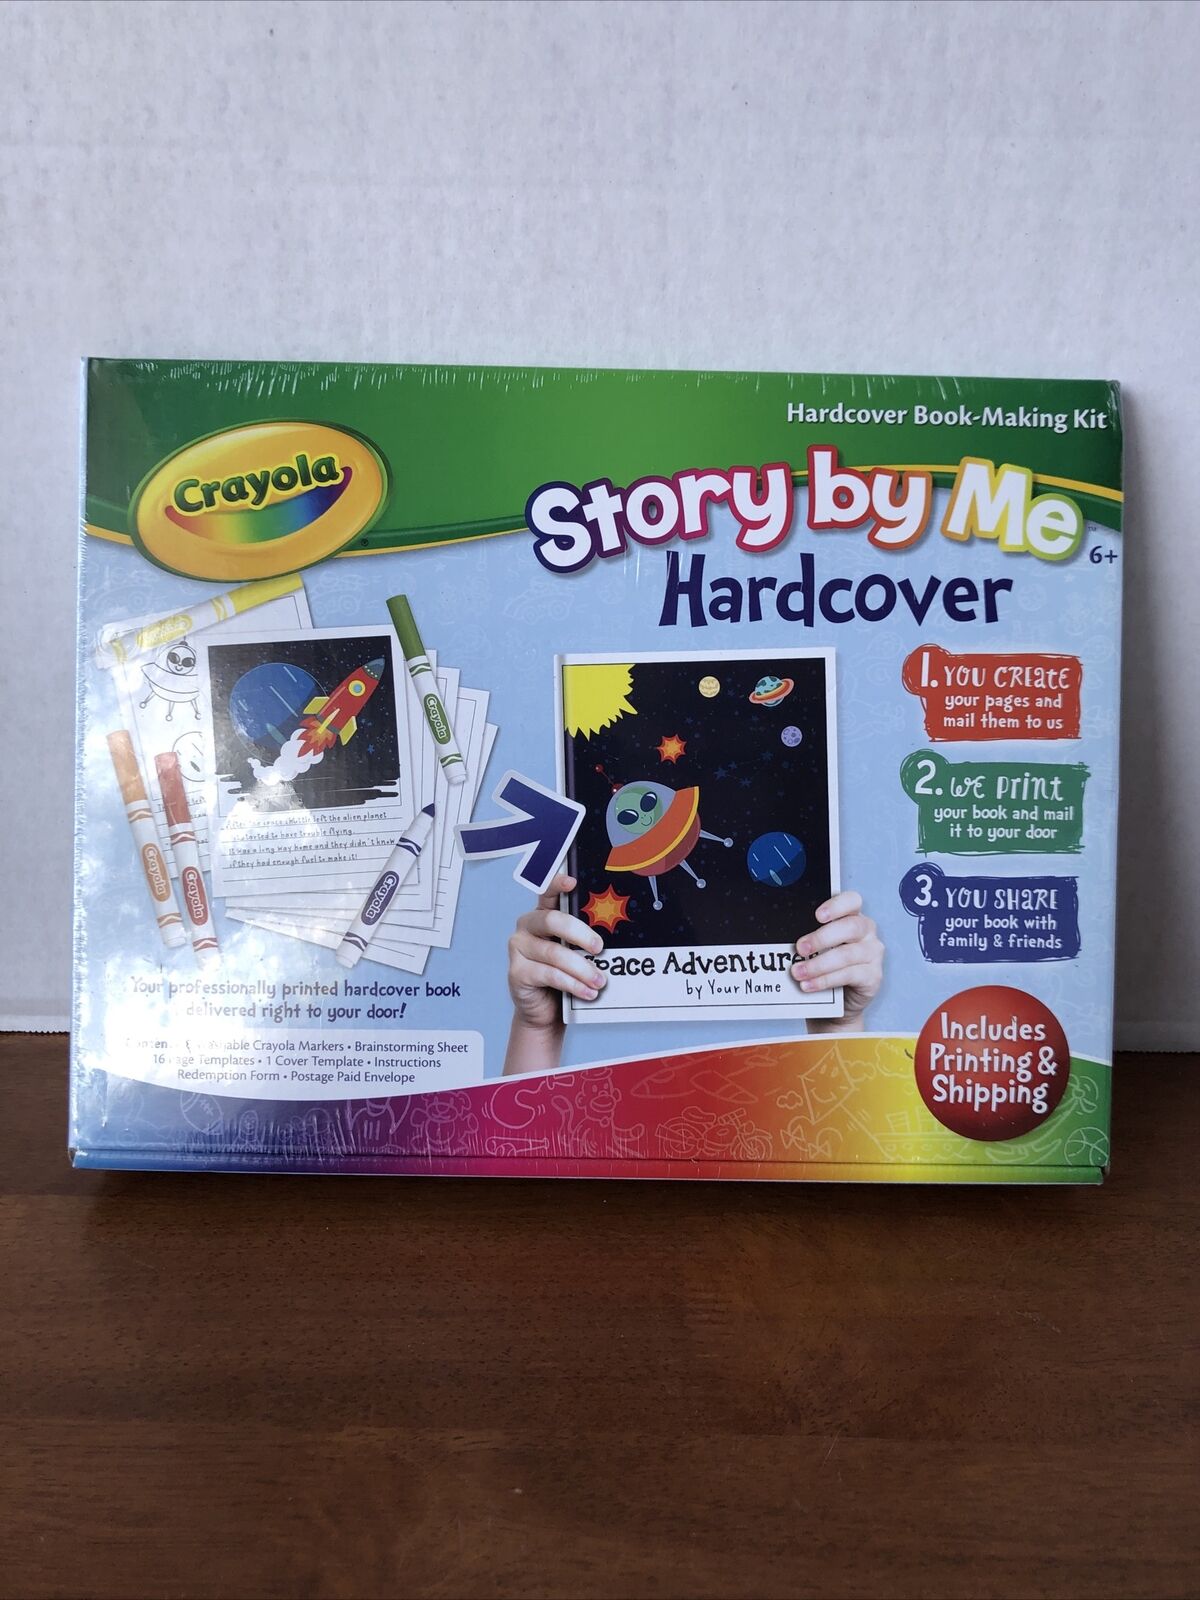 Crayola Story By Me Hardcover Kit, By Crayola, New, Hardcover Book-making Kit